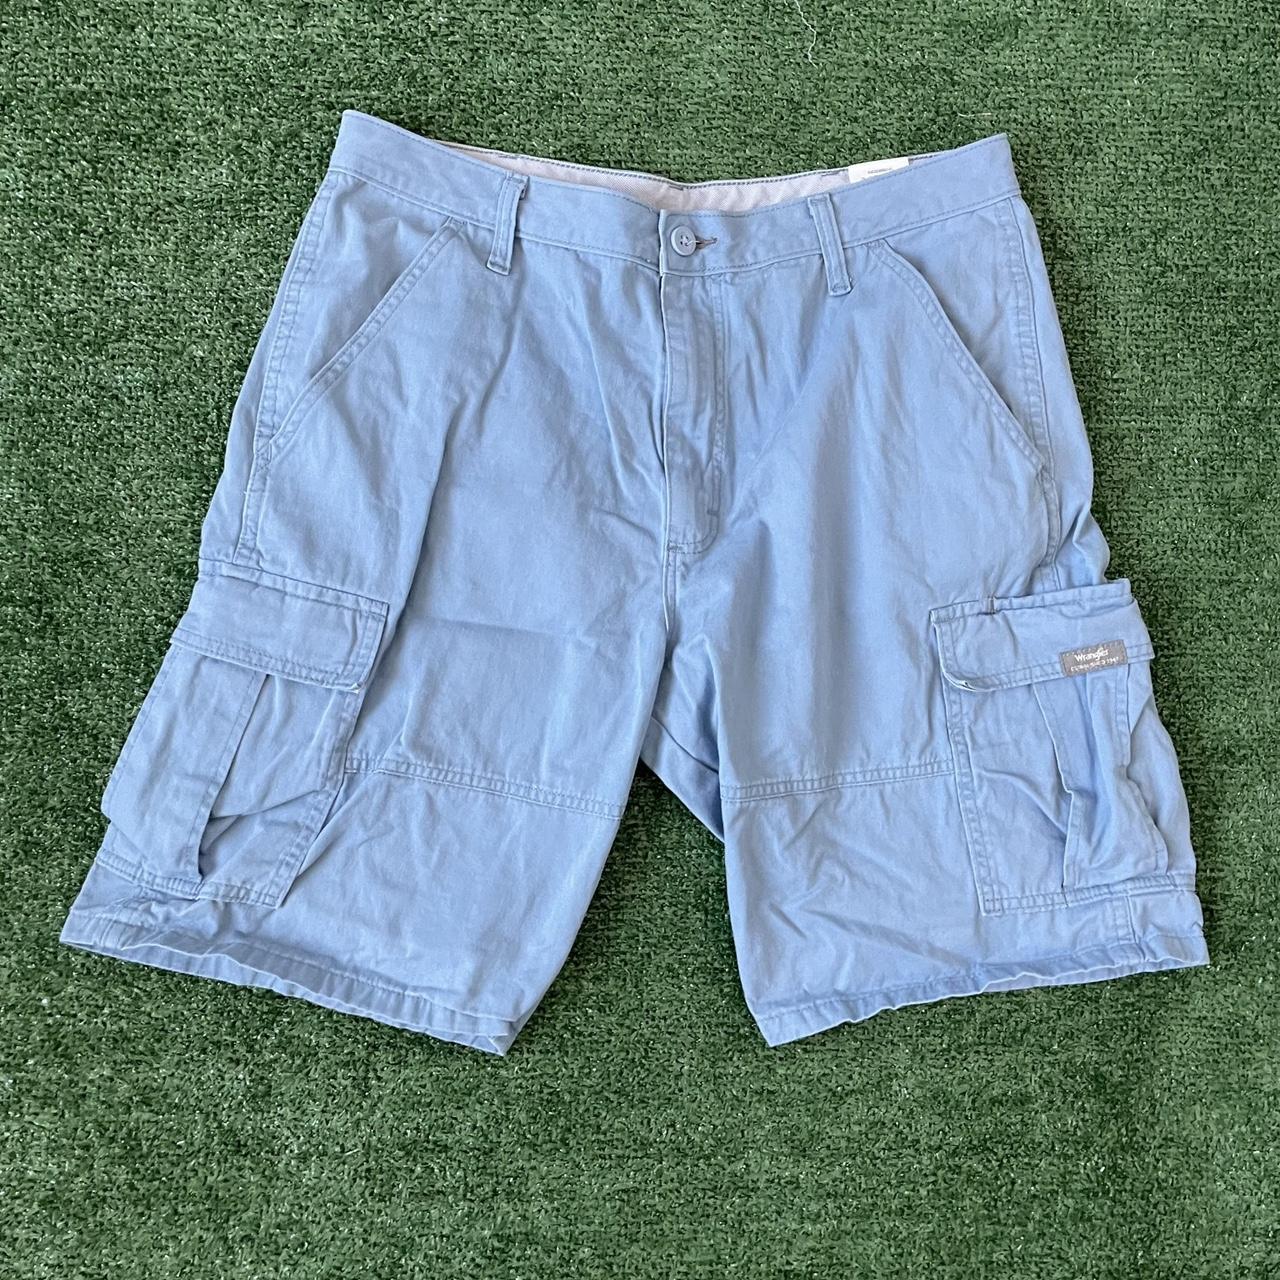 BLUE CARGO SHORTS -34x34 -Awesome pair or... - Depop